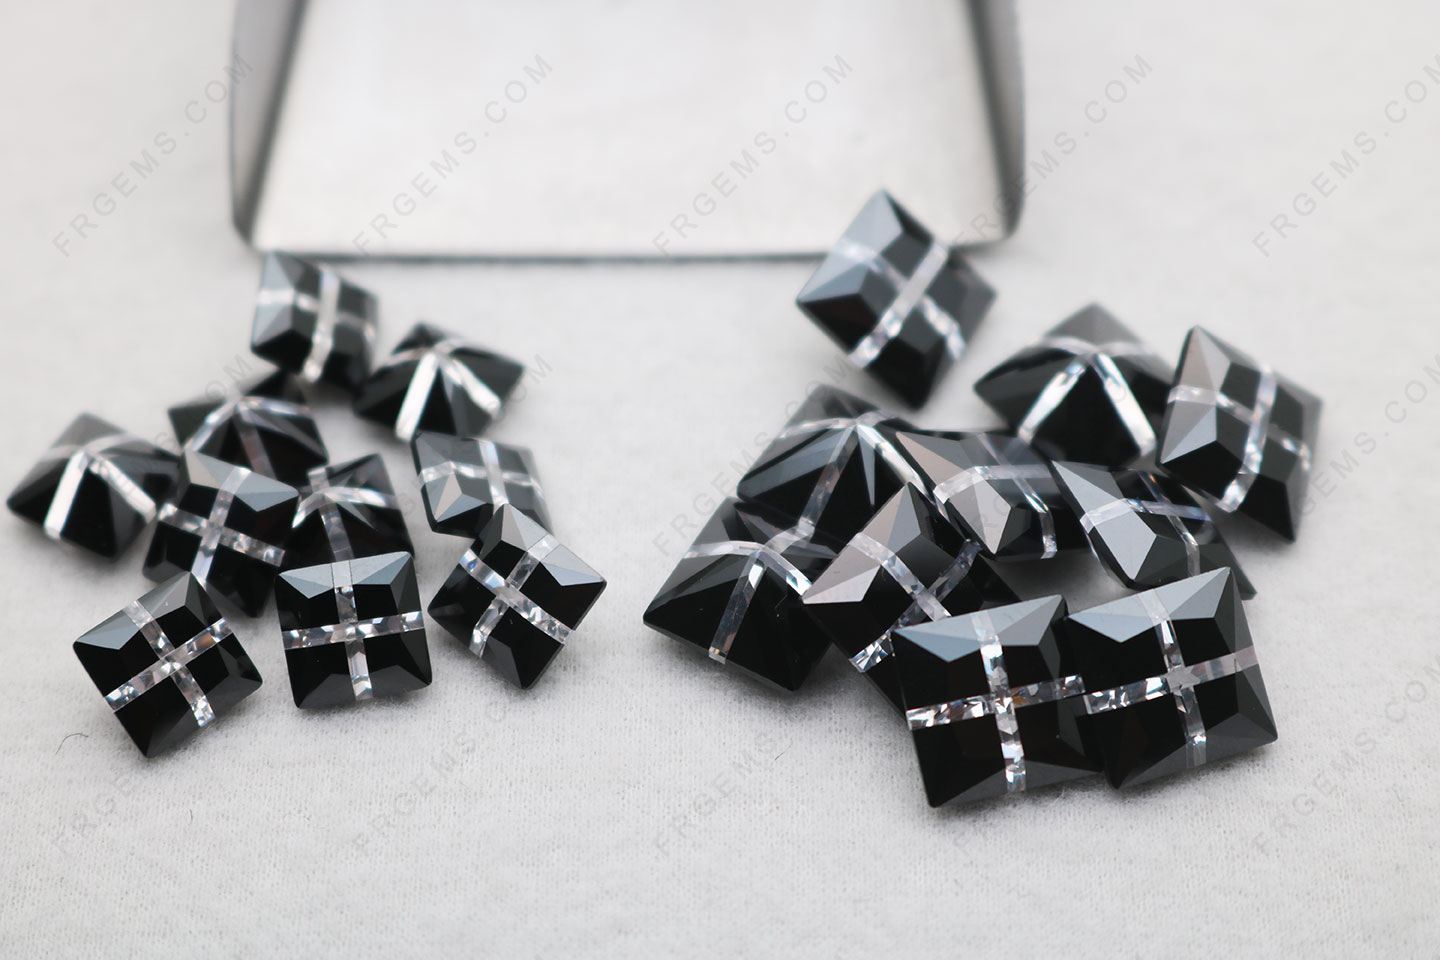 Loose Cubic Zirconia White and Black Mixed Color square Cross pattern 10x10mm and 8x8mm gemstones Wholesale